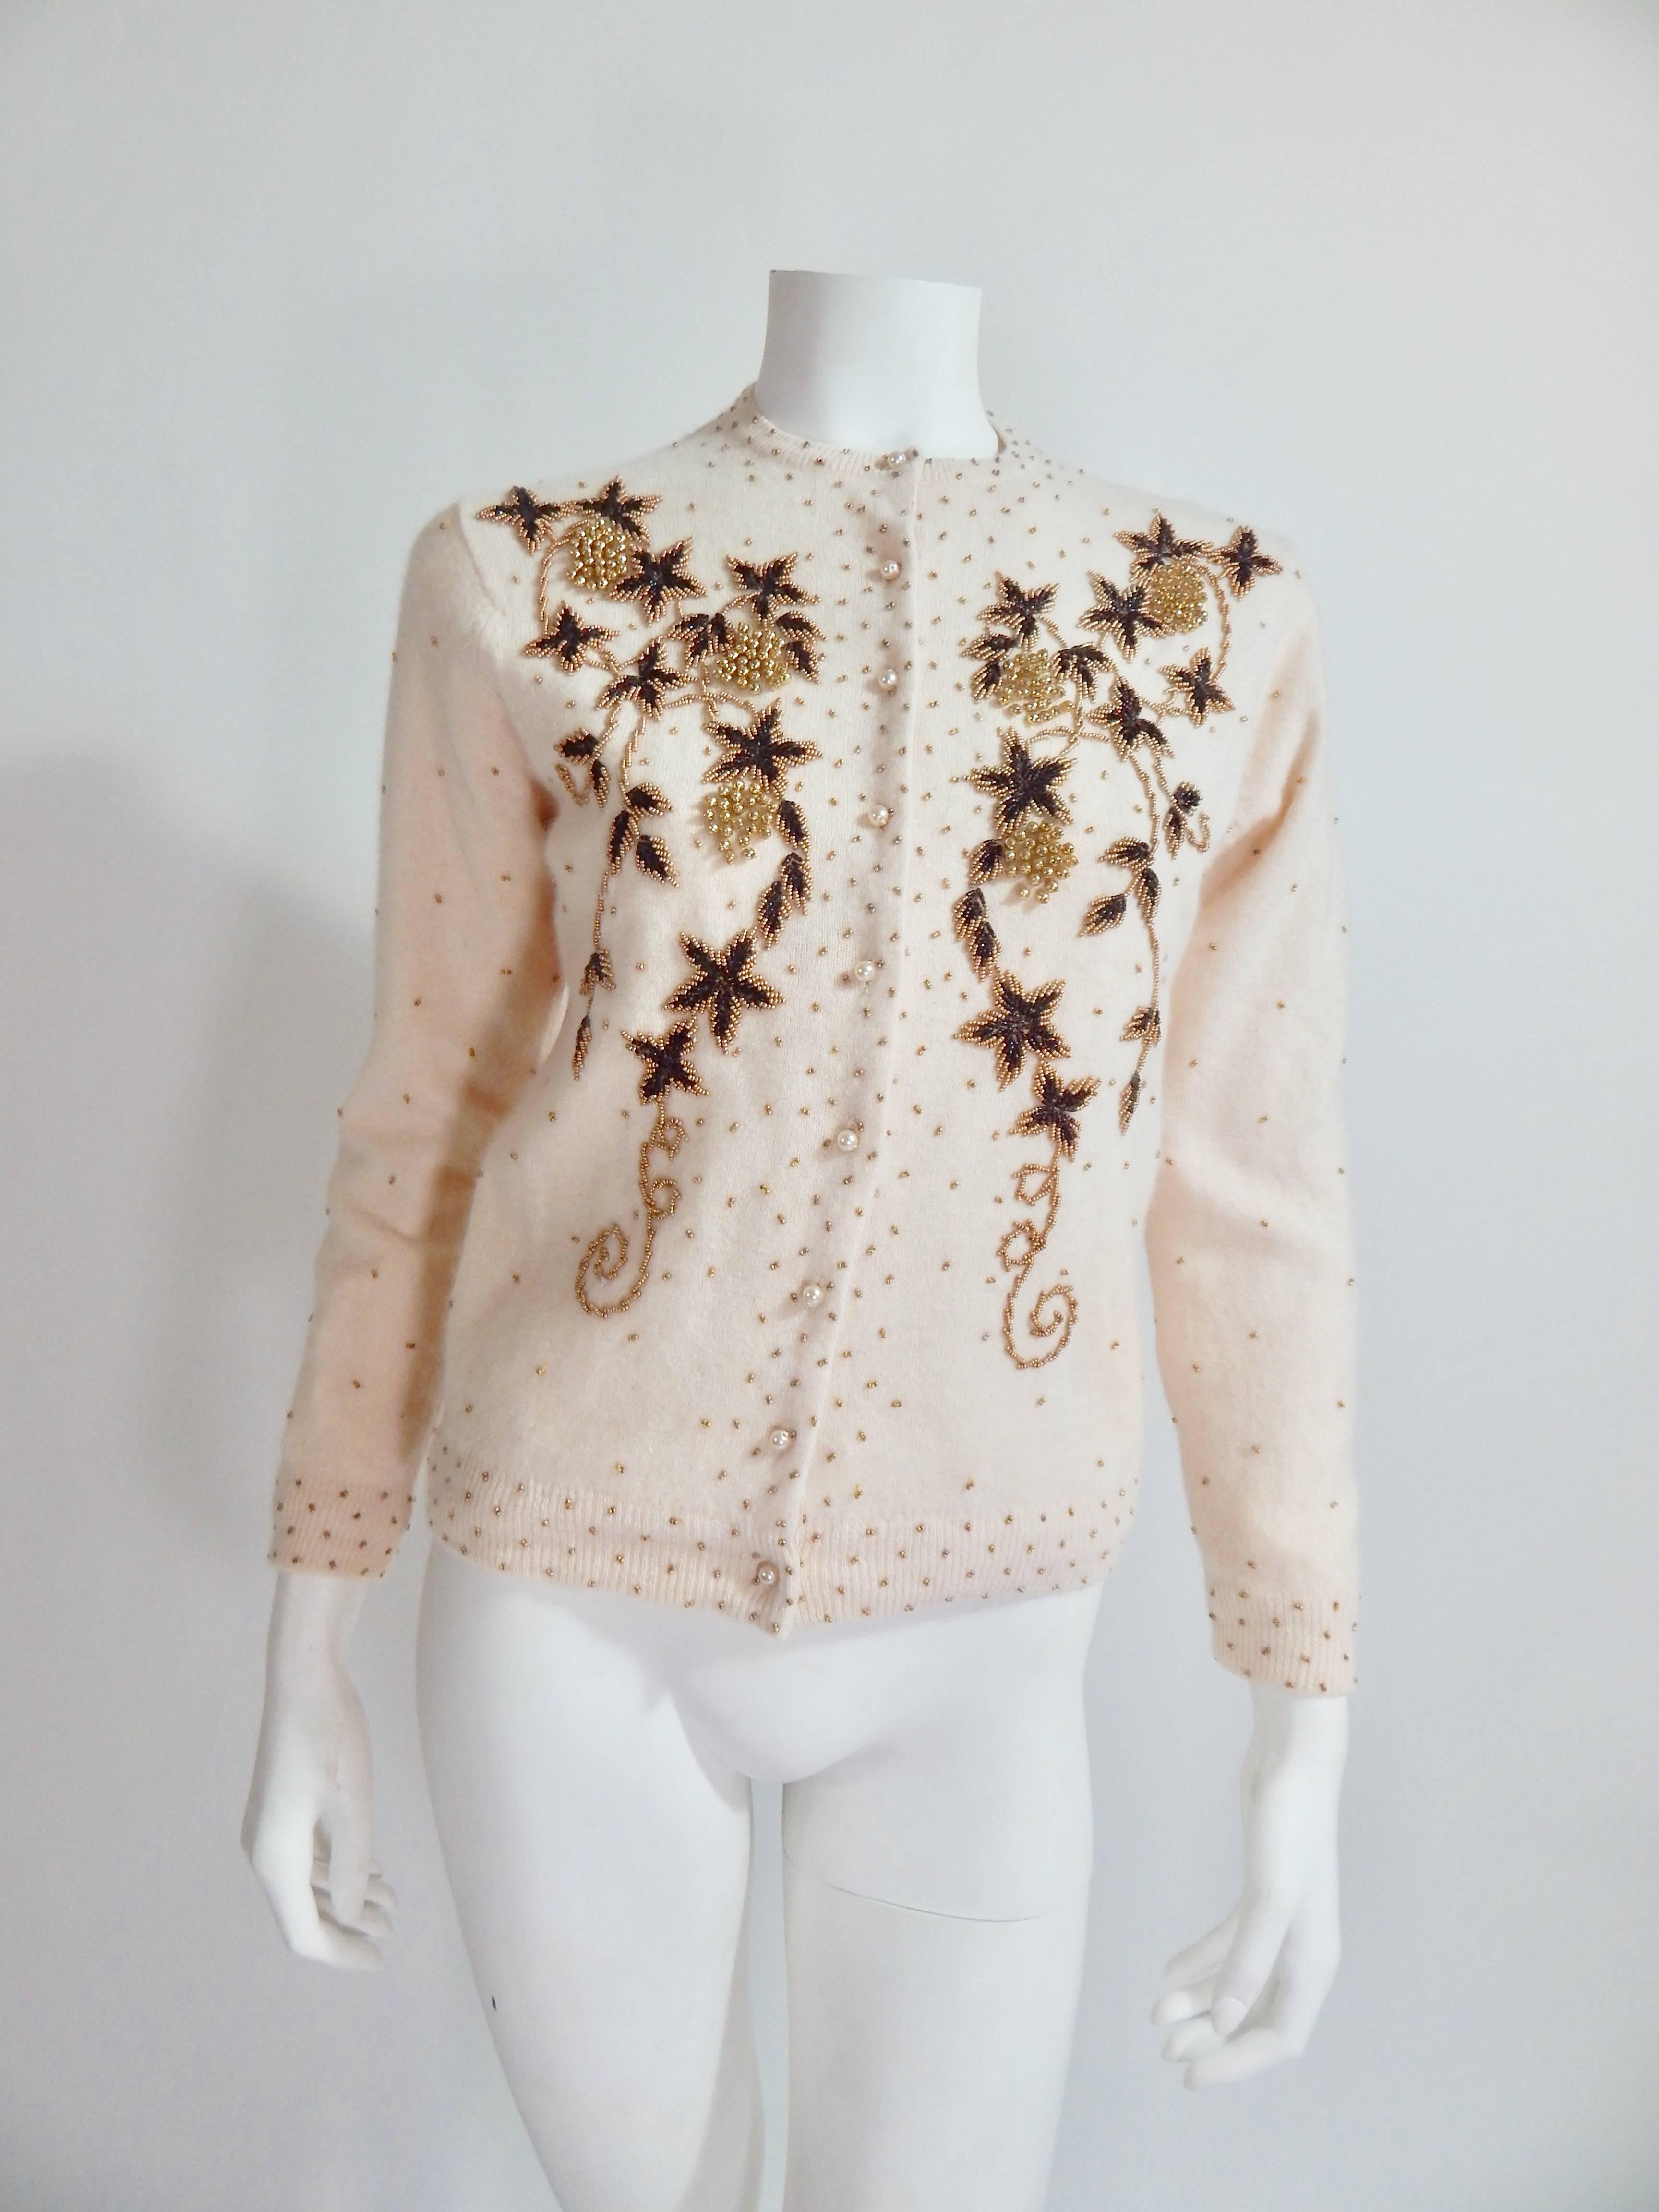 1950s Beaded Cardigan. Off White with Black and Gold Beadwork. Off White Silk Lining. Size Small / Medium 